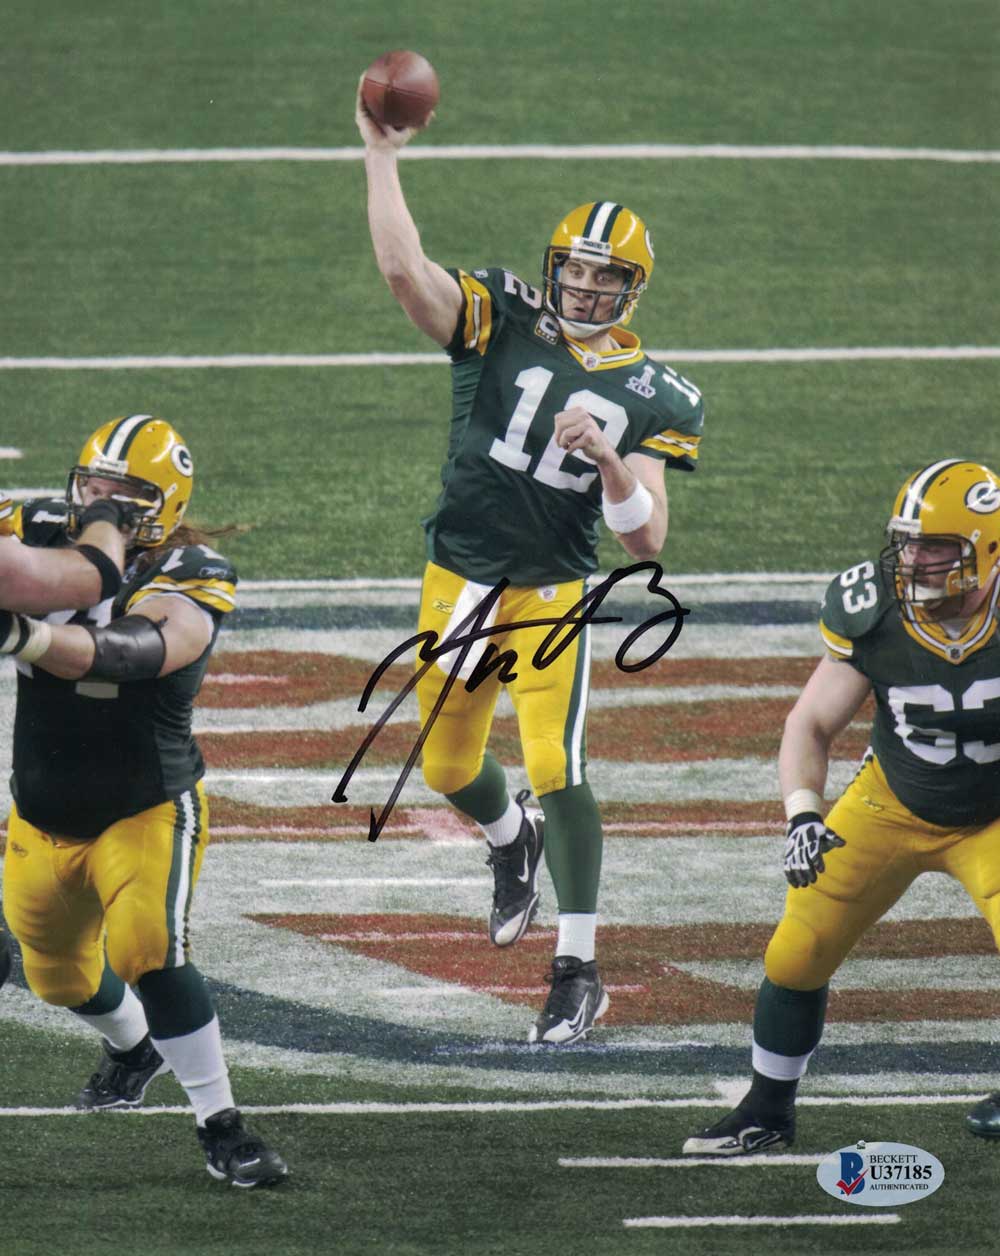 Aaron Rodgers Autographed/Signed Green Bay Packers 8x10 Photo BAS 29954